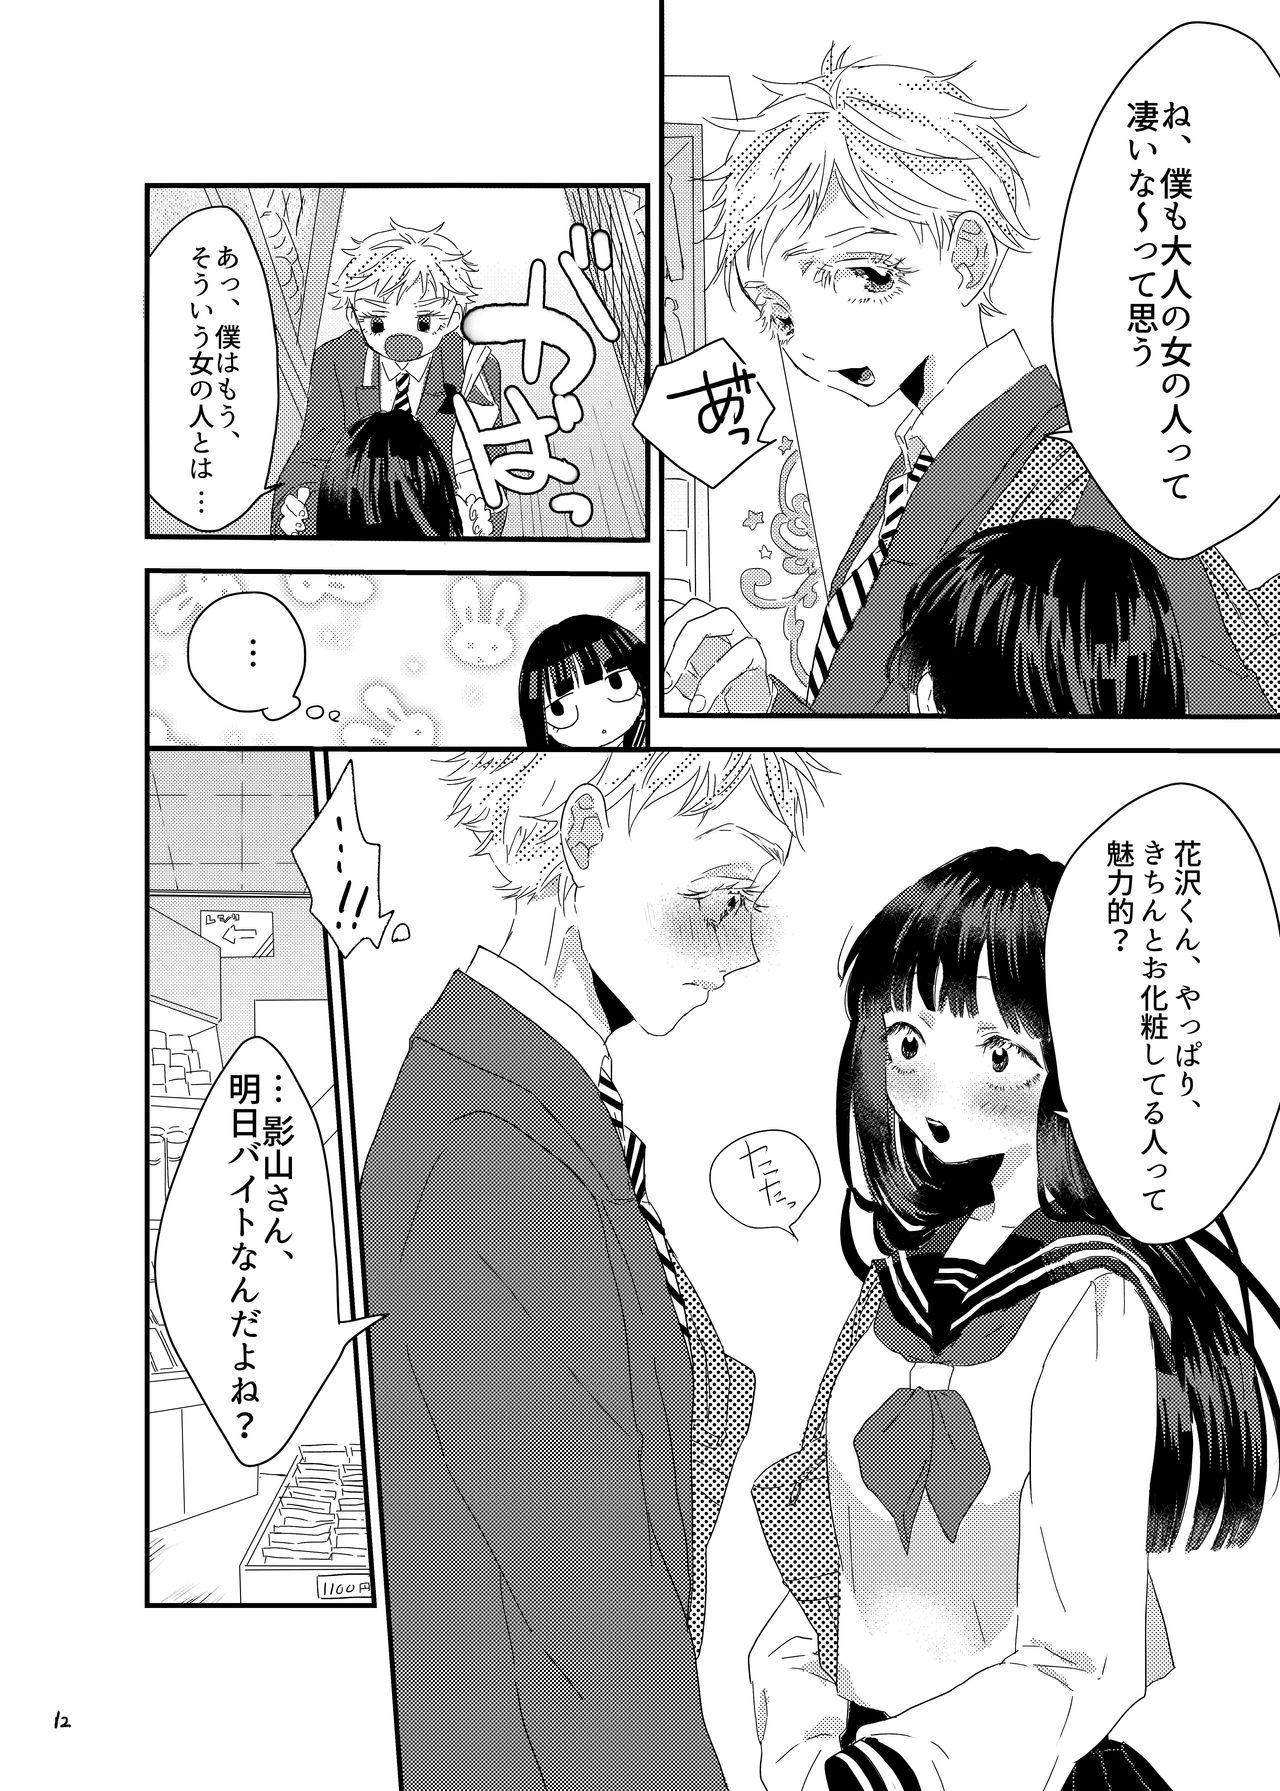 Pure 18 砂糖菓子姫 - Mob psycho 100 Colombia - Page 11